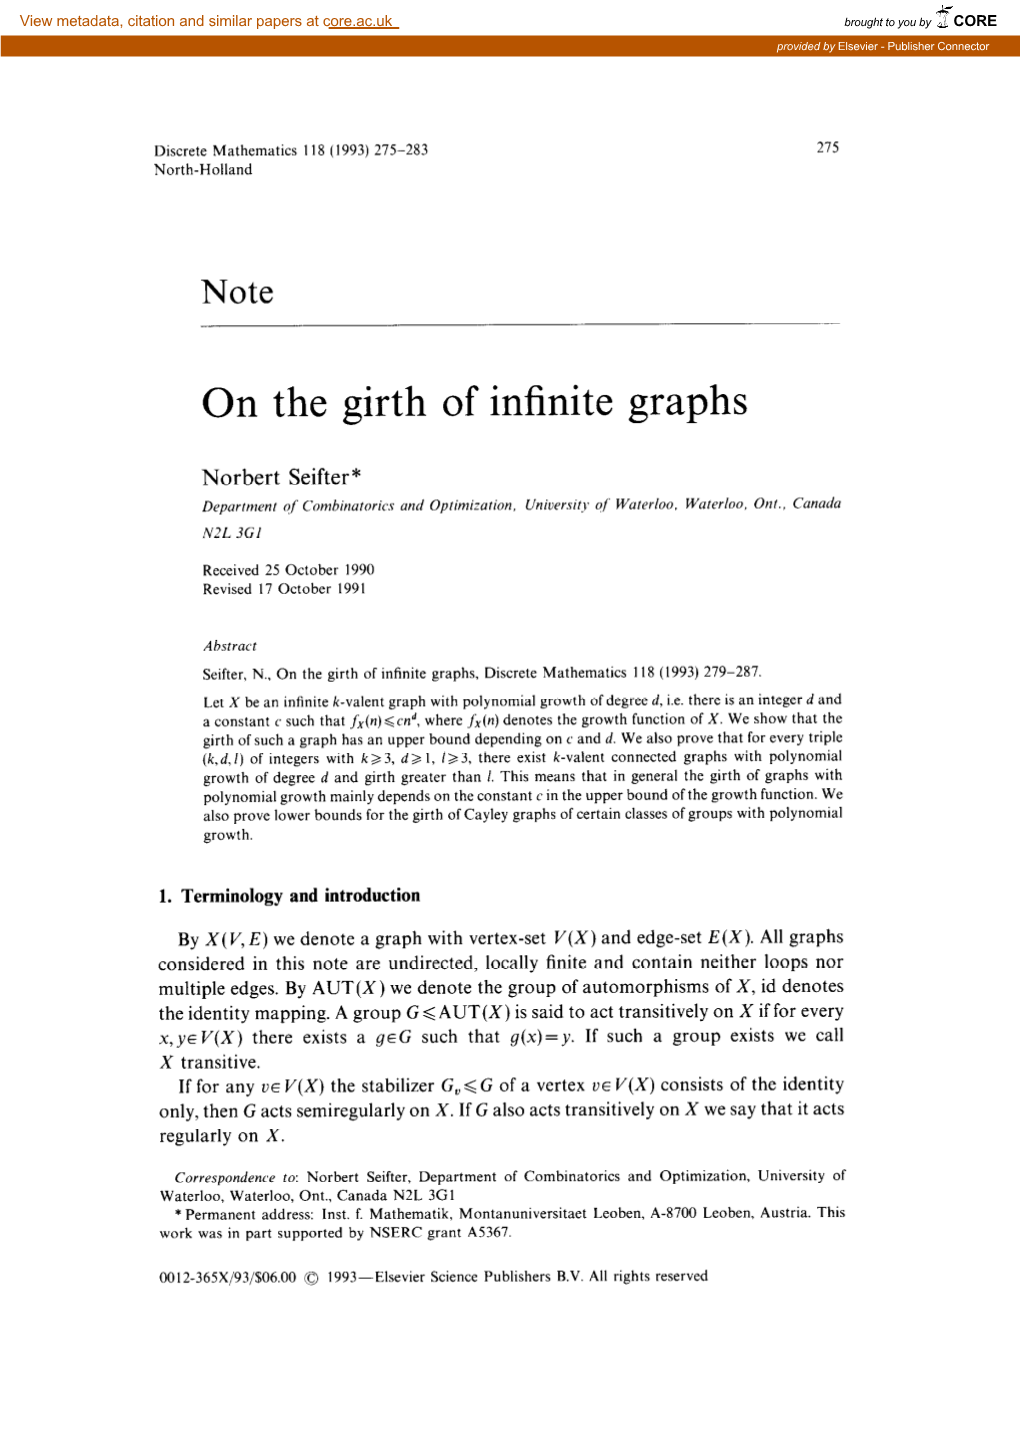 On the Girth of Infinite Graphs